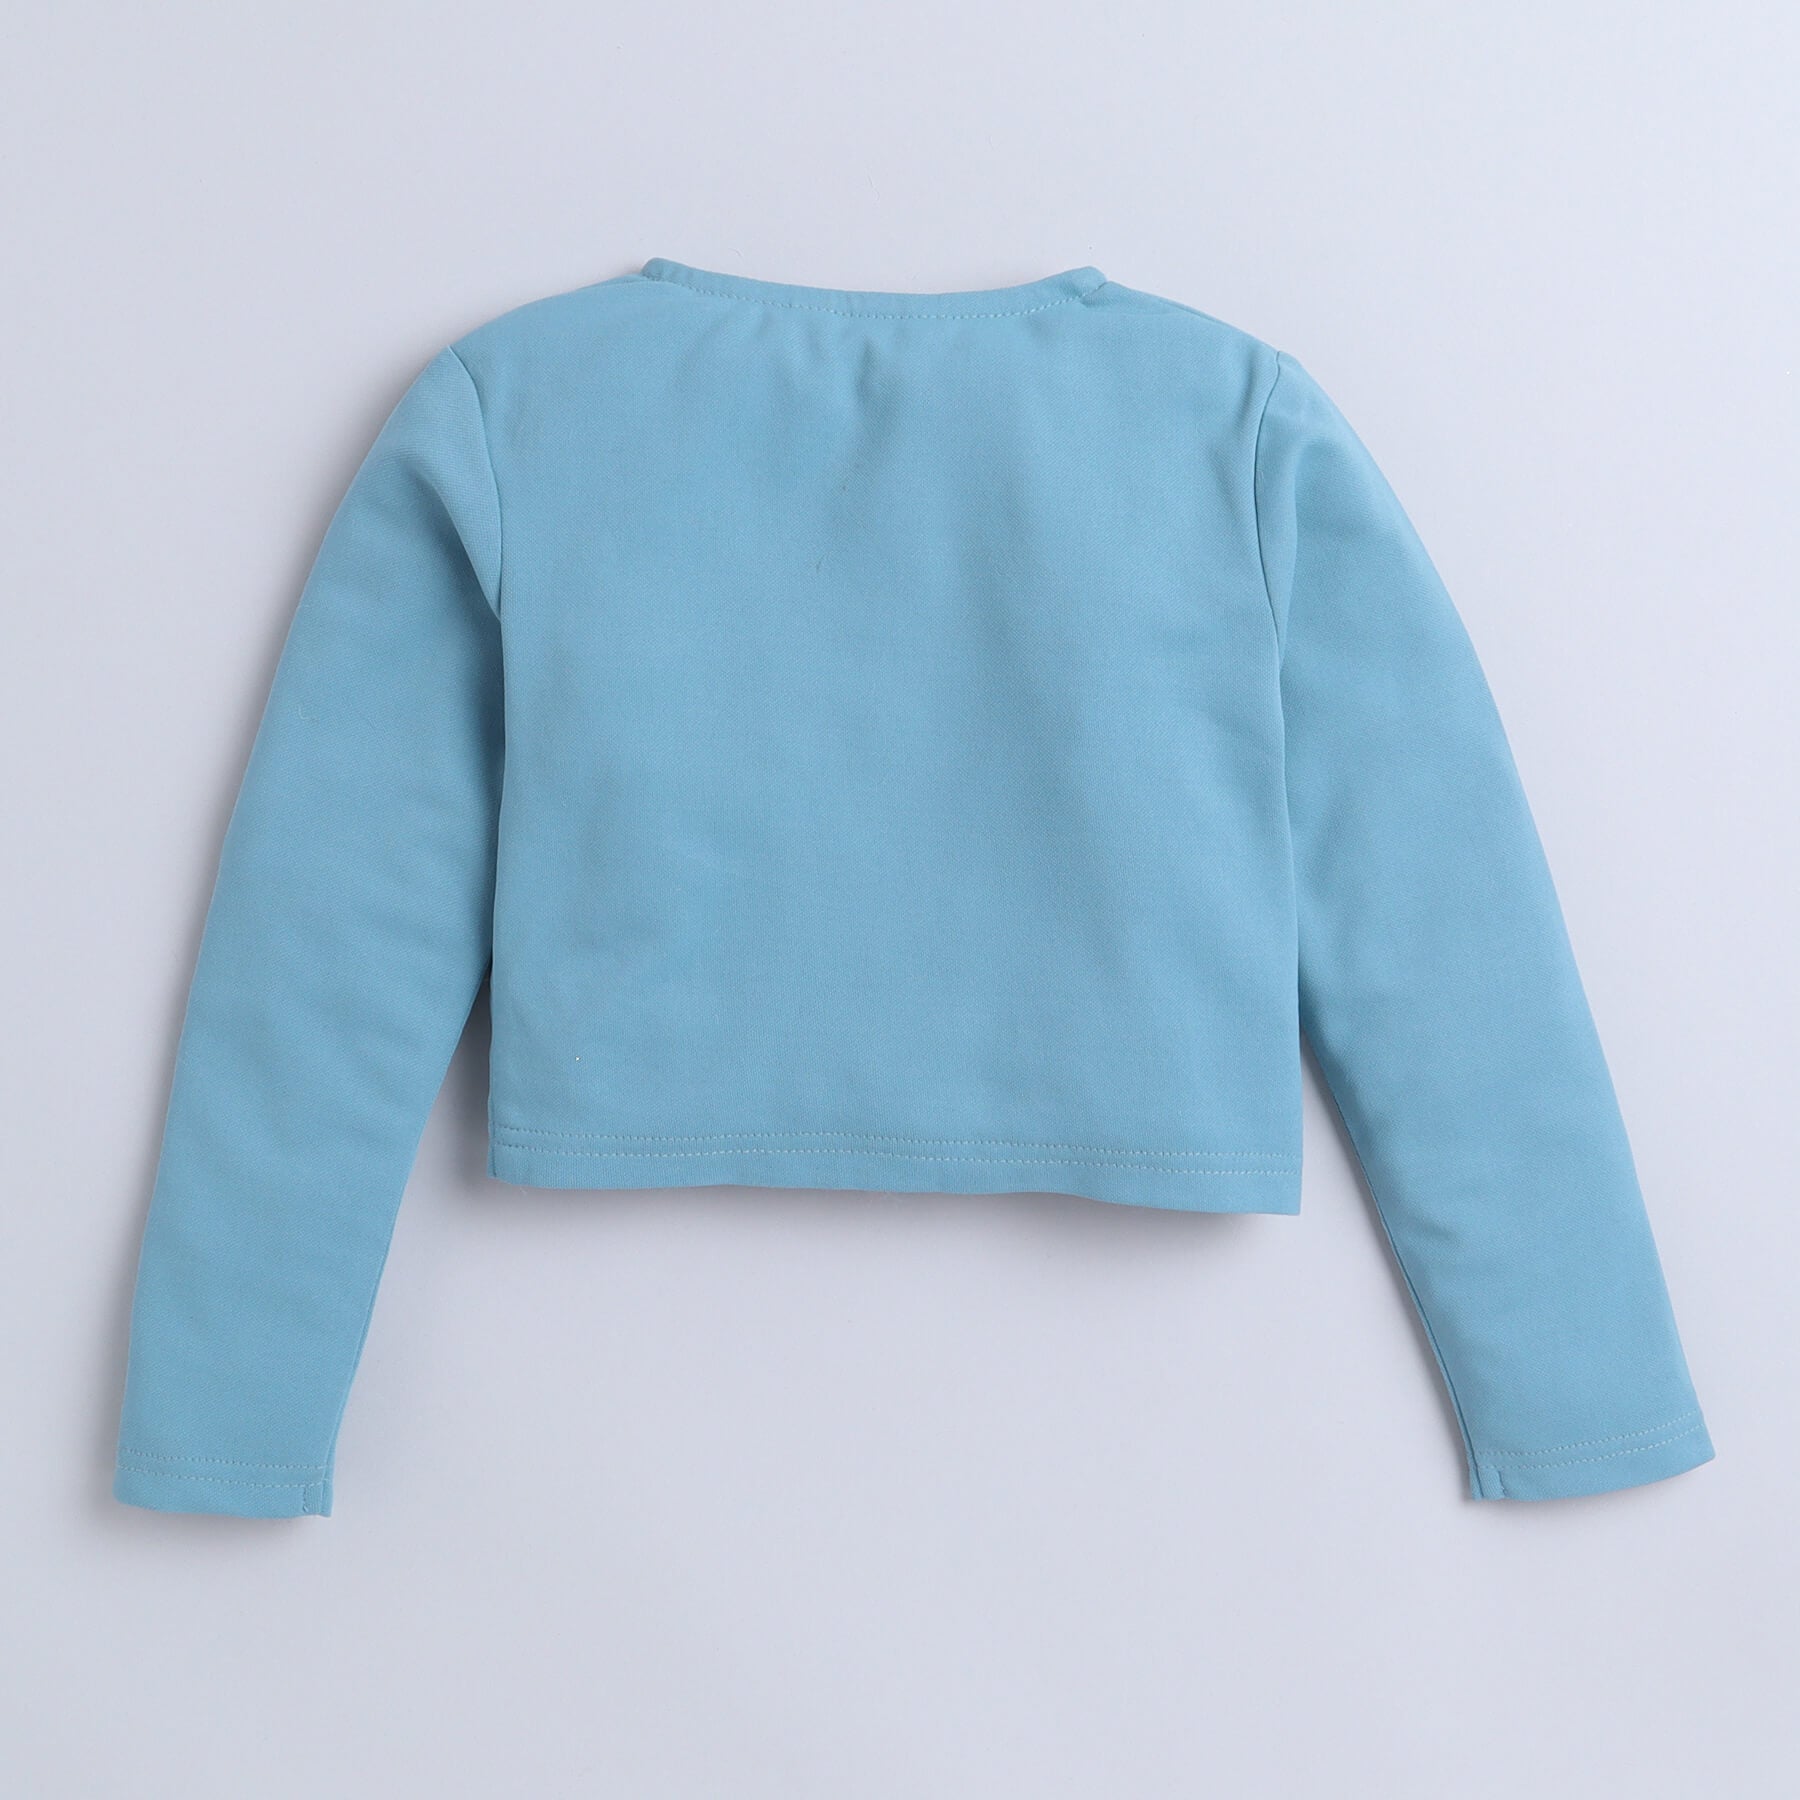 Taffykids Full sleeves front rushed crop top-Mint blue